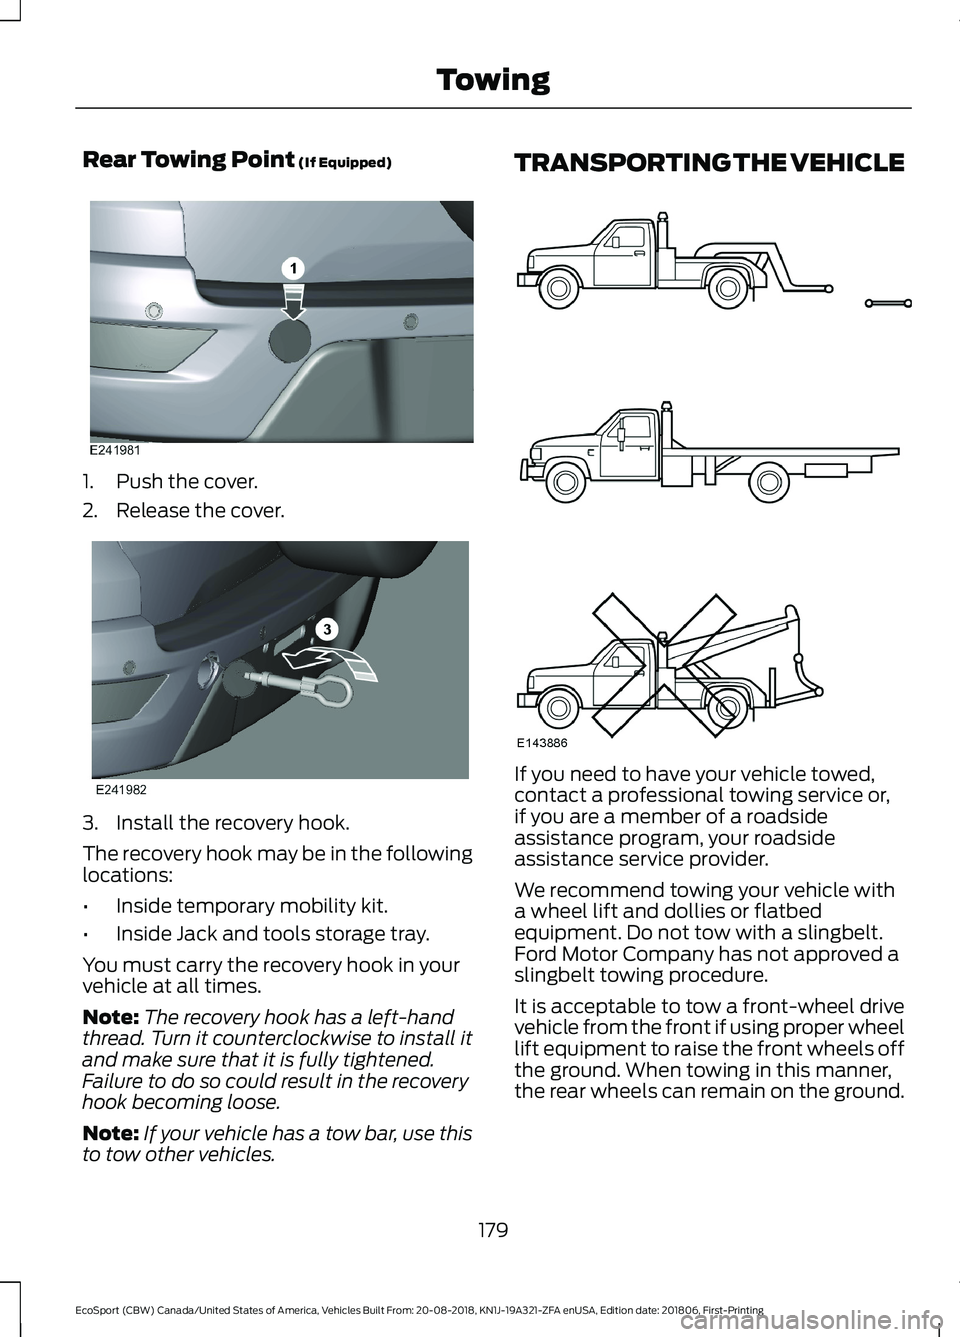 FORD ECOSPORT 2019 Owners Guide Rear Towing Point (If Equipped)
1.Push the cover.
2.Release the cover.
3.Install the recovery hook.
The recovery hook may be in the followinglocations:
•Inside temporary mobility kit.
•Inside Jack